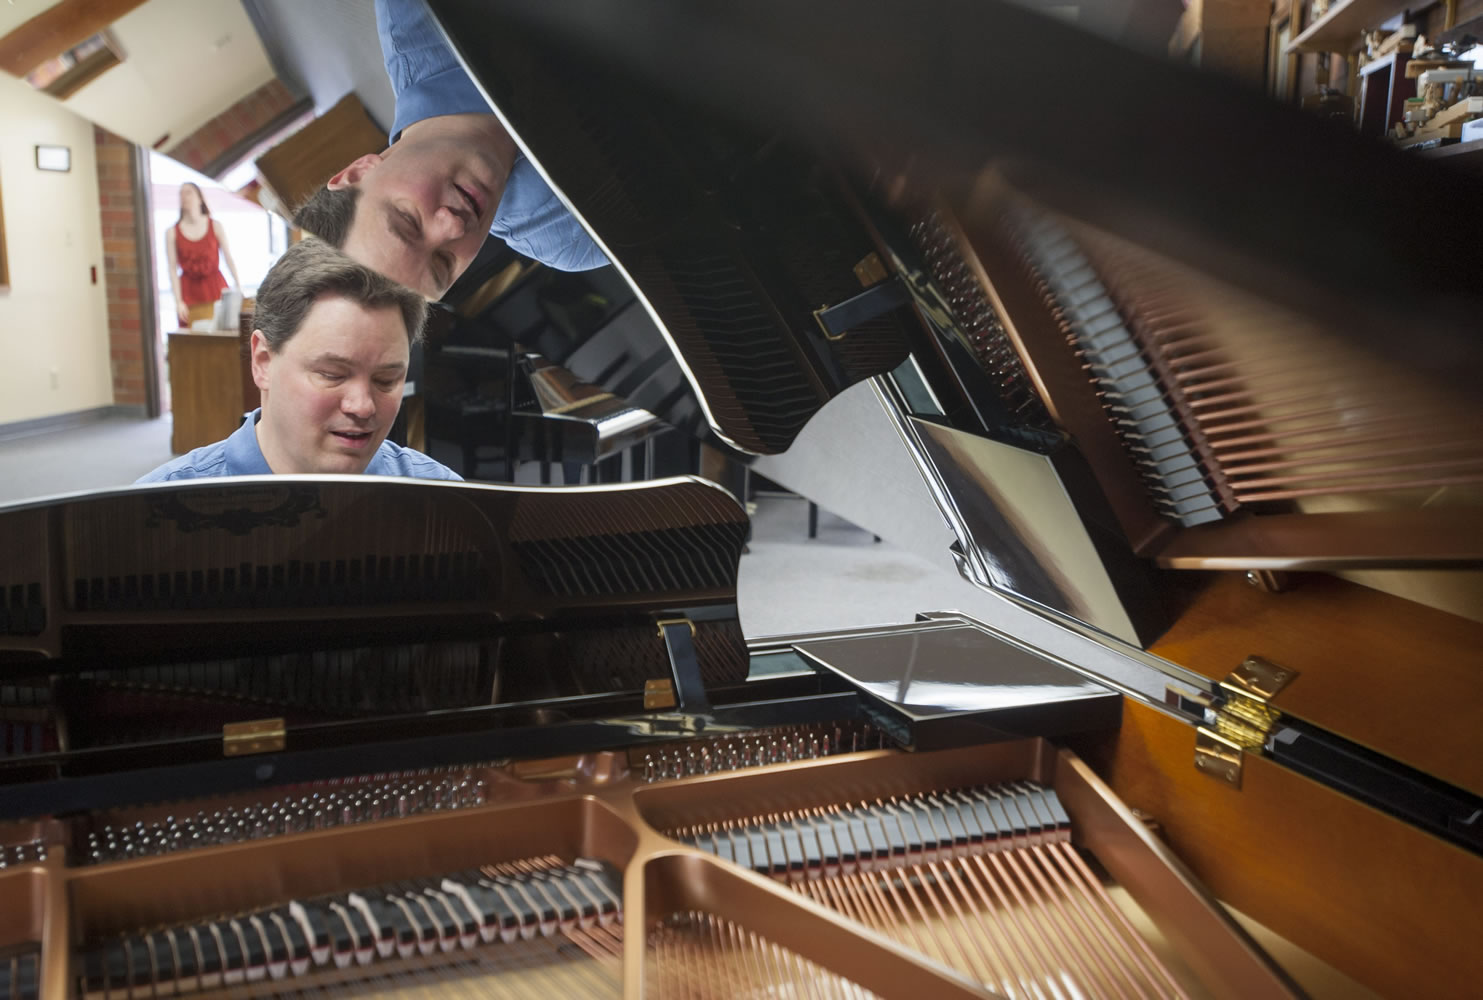 Pianist Sam Stahl participates in Give More 24! in a piano-playing marathon  in Vancouver on Thursday. The event is Clark County's annual 24-hour online giving competition, in which nonprofits encourage giving throughout the day with parties and promotions.